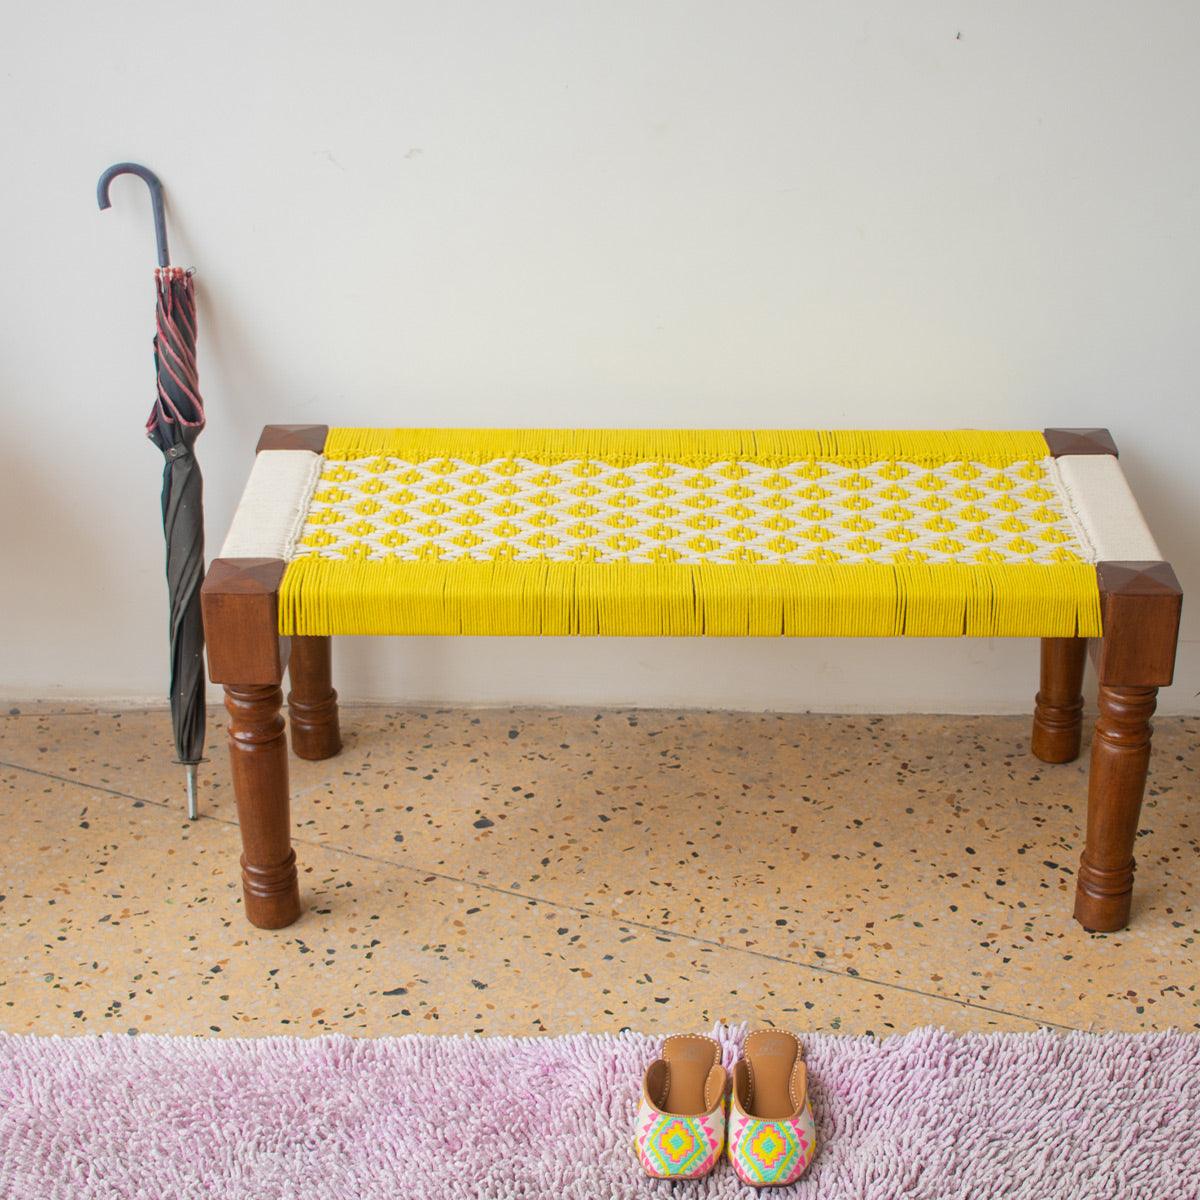 Parrotfinch Recycled Cotton Wooden Bench - Sirohi.org - Colour_White, Colour_Yellow, Purpose_Indoor Seating, Purpose_Outdoor Seating, Rope Material_Recycled Cotton